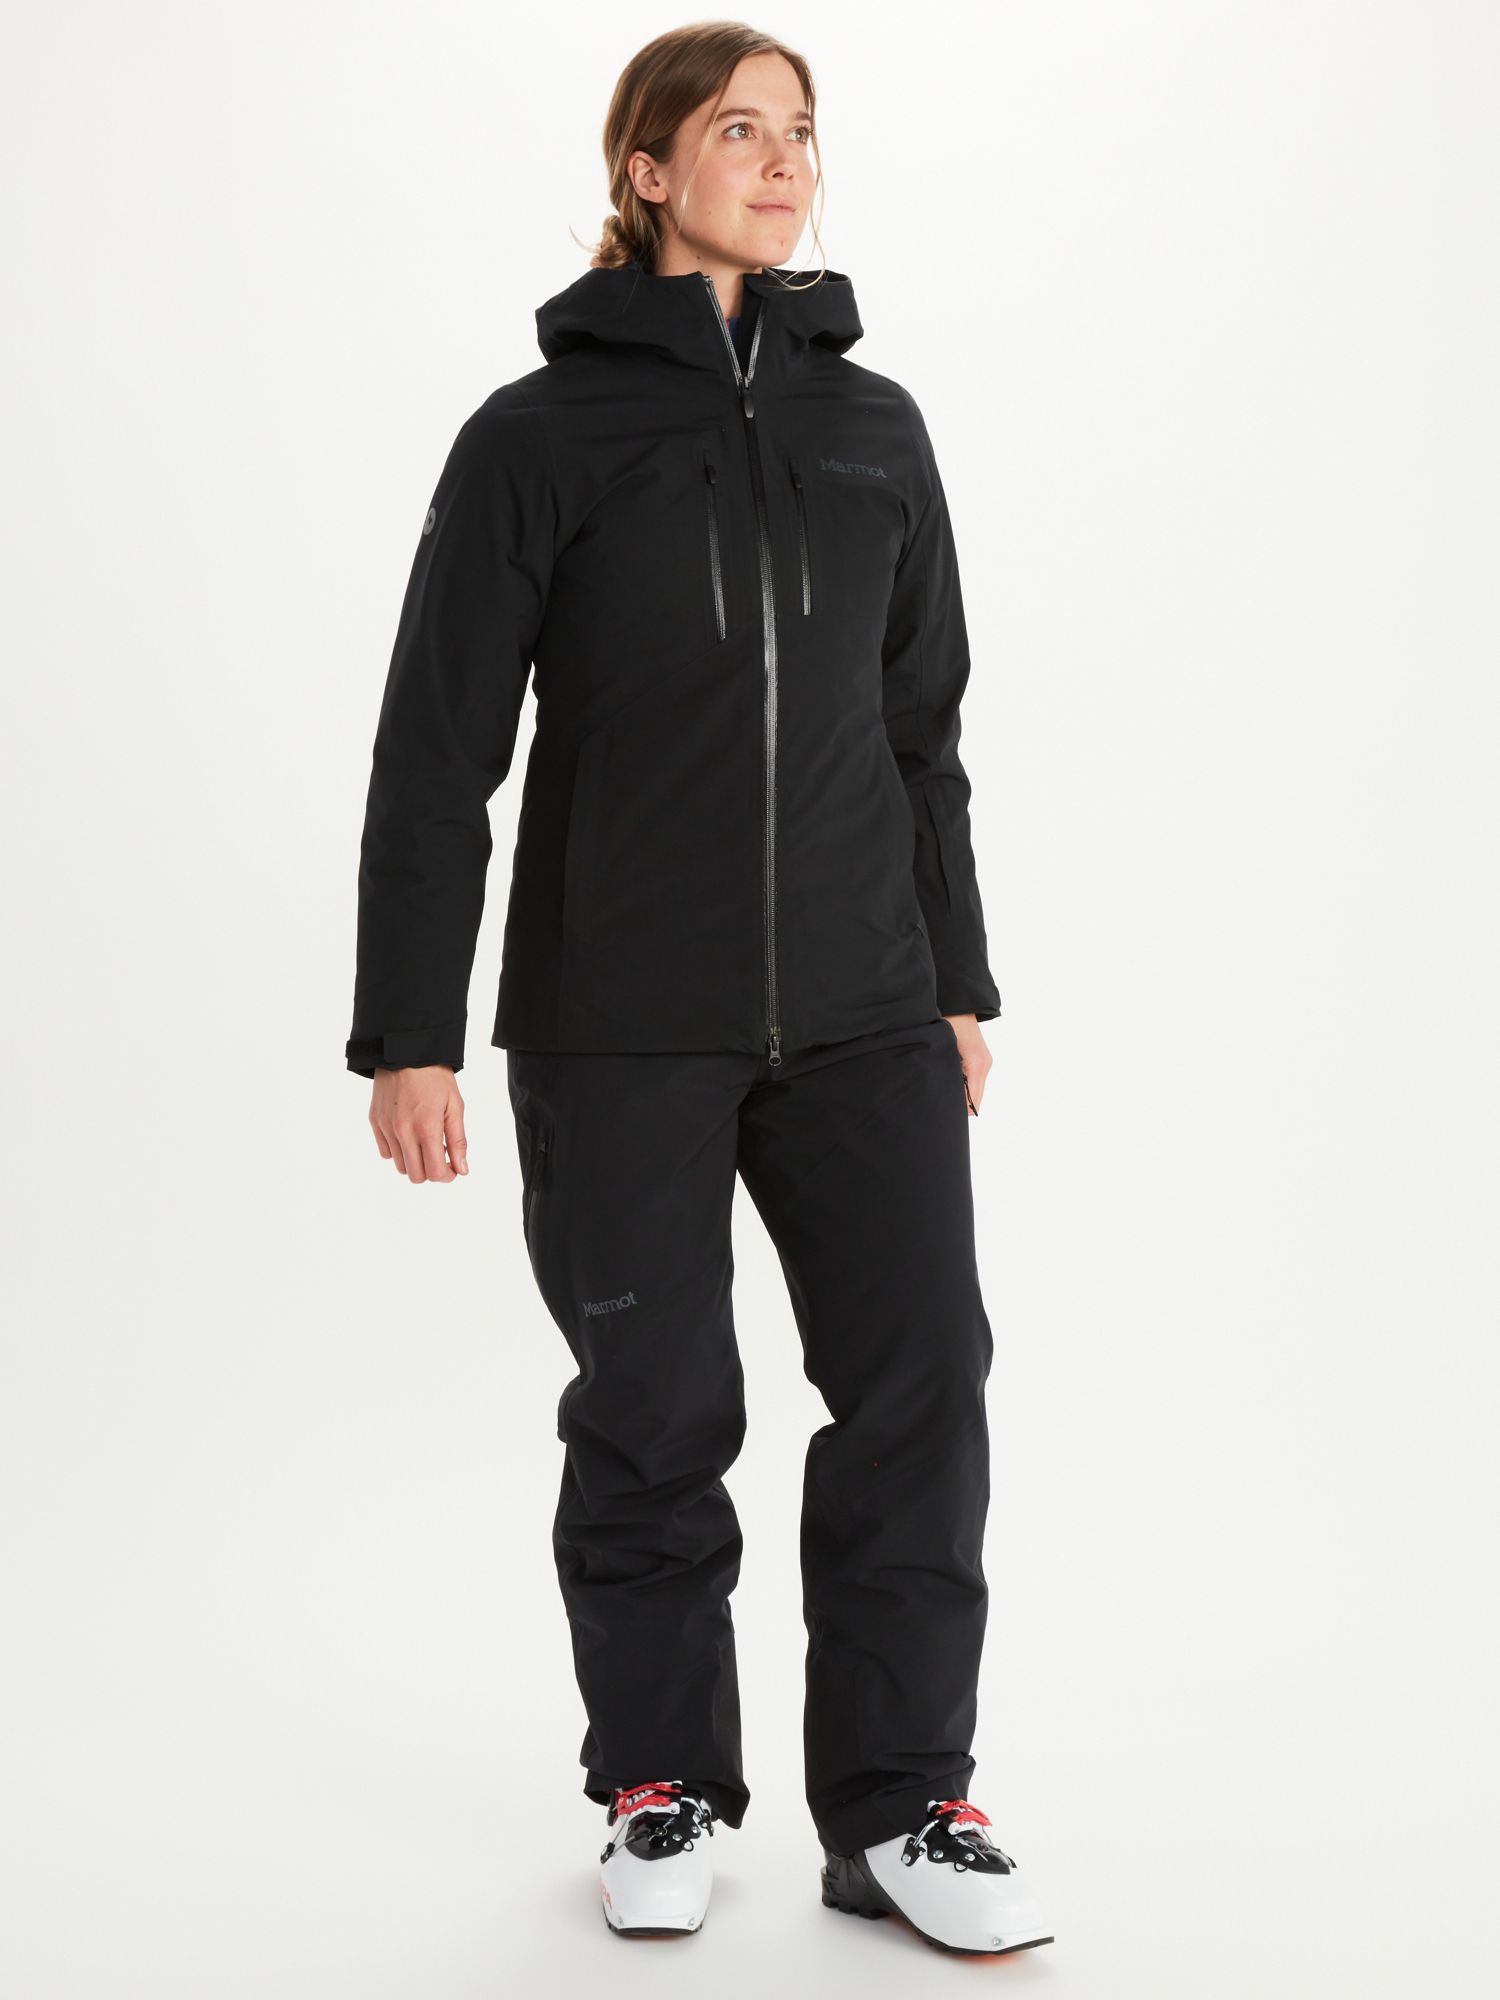 Women's Featherless Component 3-in-1 Jacket